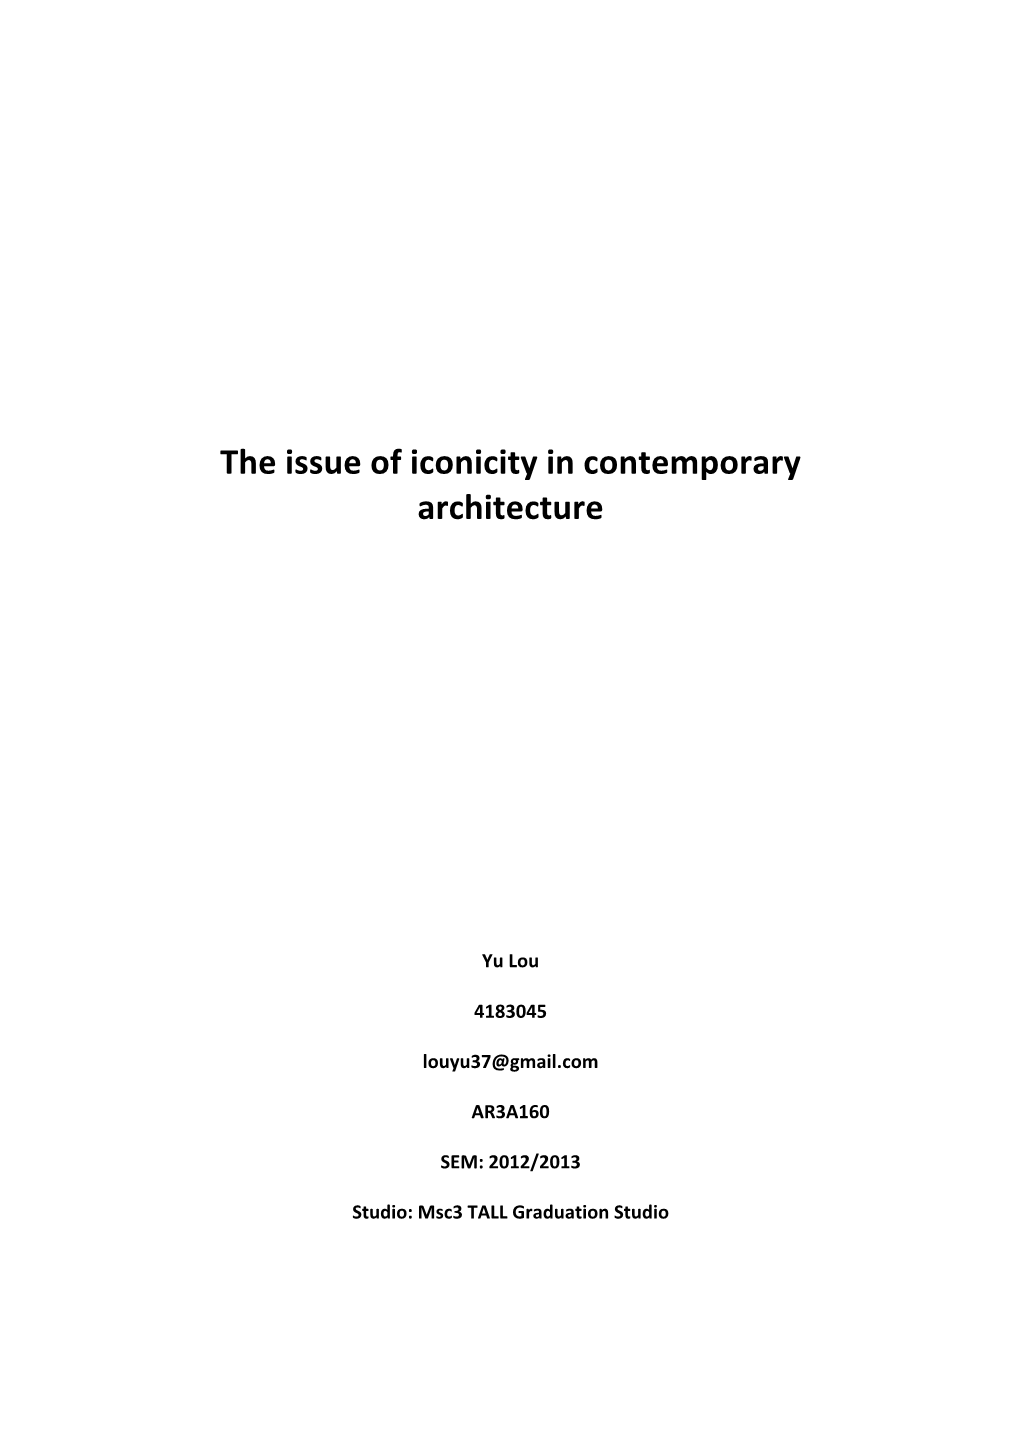 The Issue of Iconicity in Contemporary Architecture